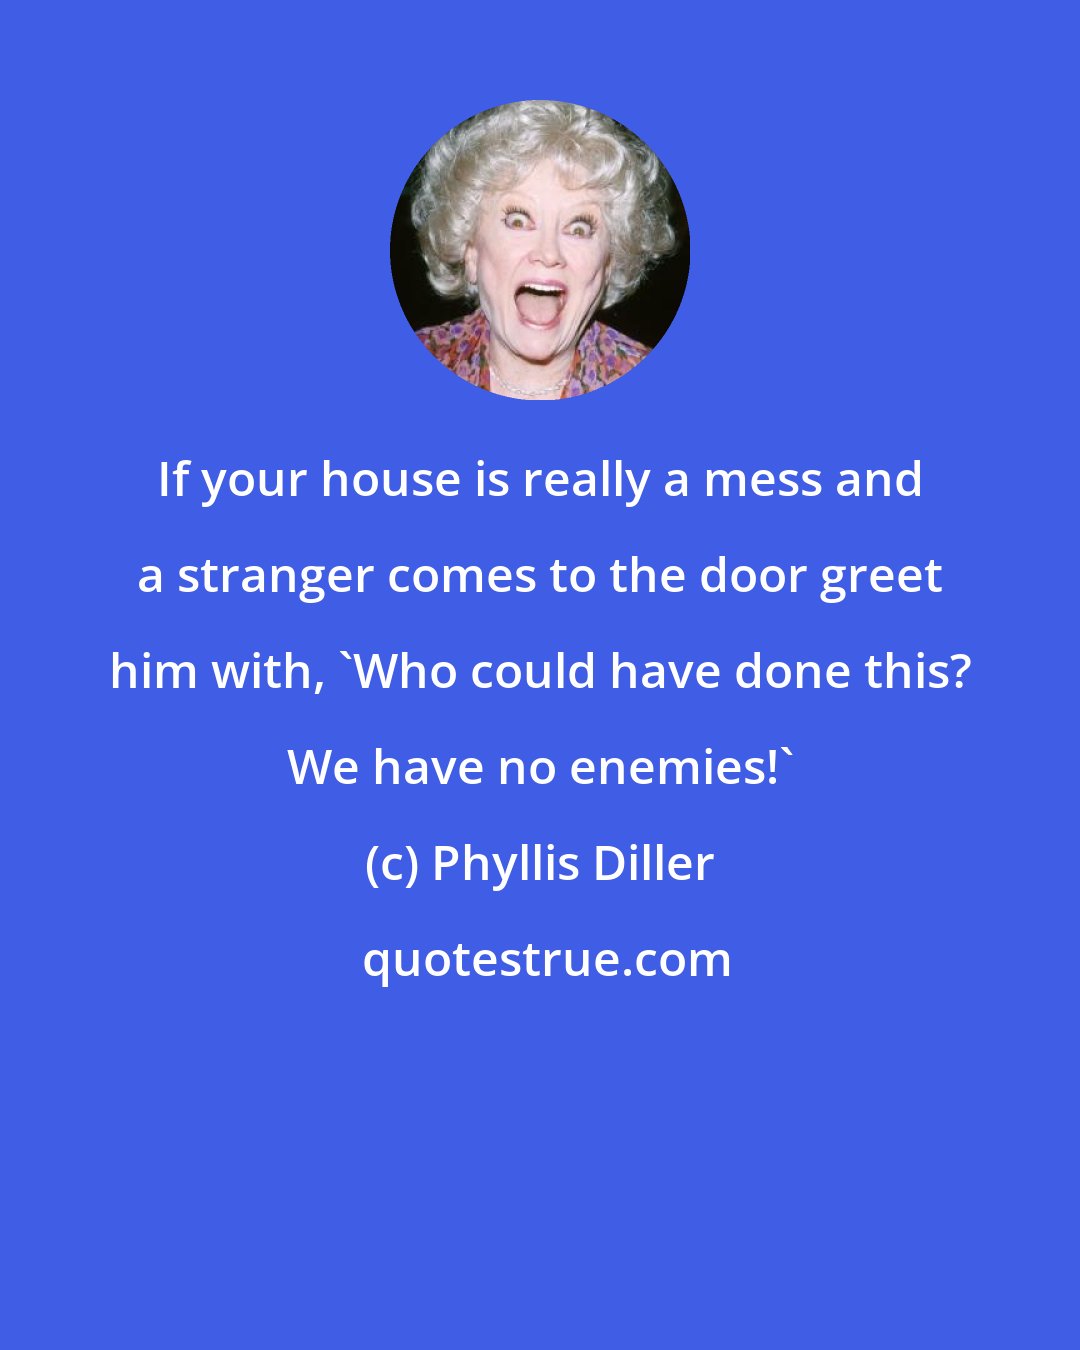 Phyllis Diller: If your house is really a mess and a stranger comes to the door greet him with, 'Who could have done this? We have no enemies!'